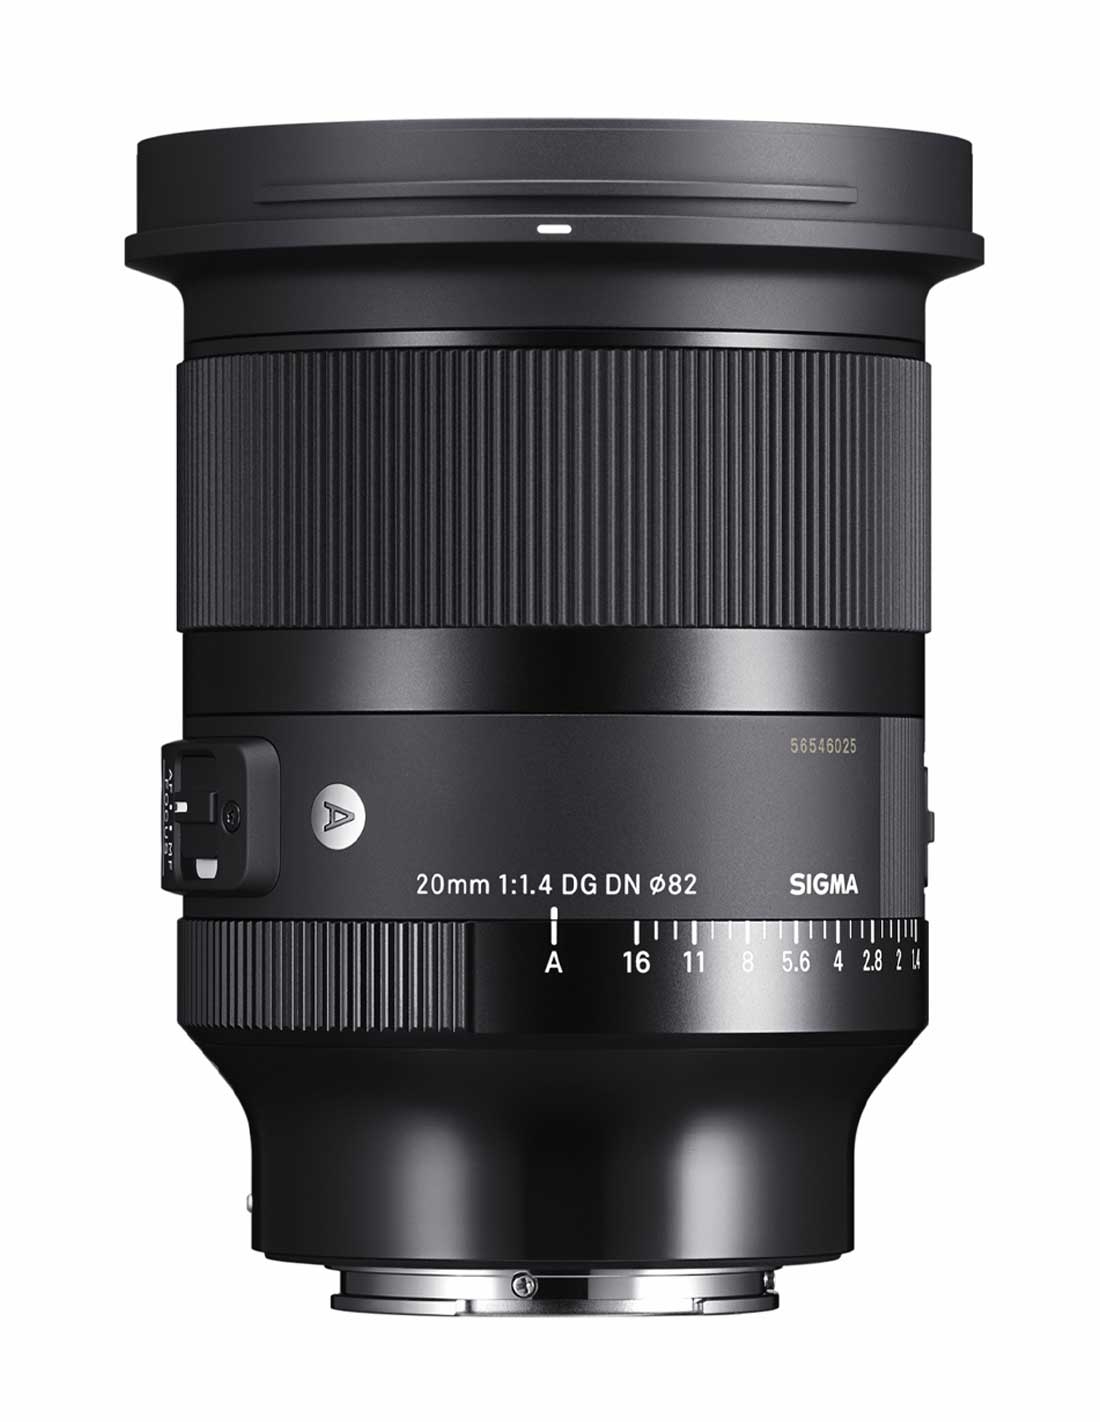 sigma art 20mm f1.4 for sony